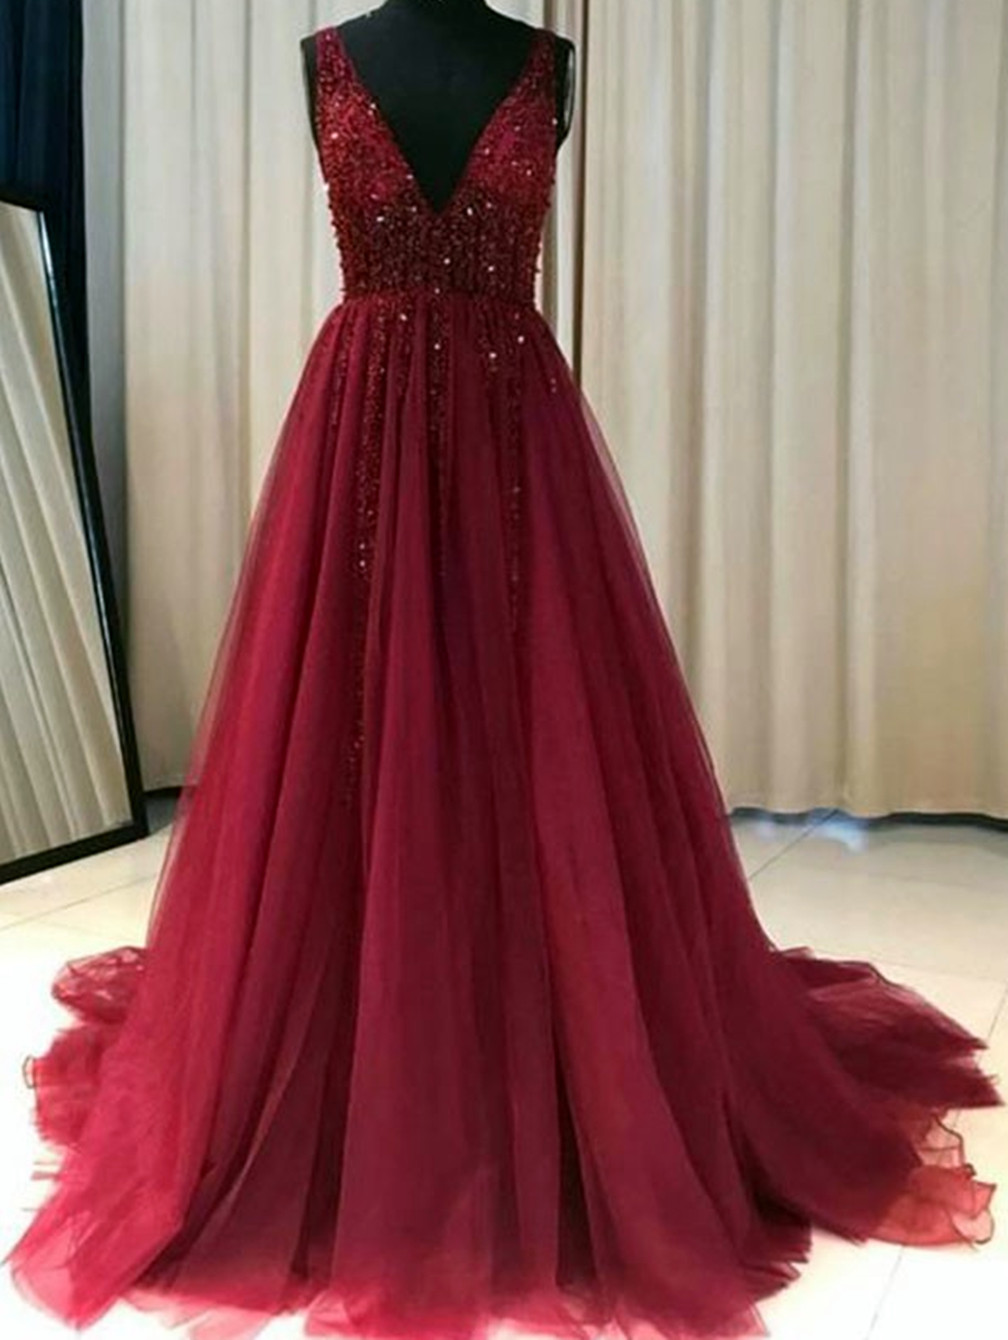 Women A-line/princess Prom Dresses Long V-neck Evening Party Gowns Sleeveless Formal Dress Yp076